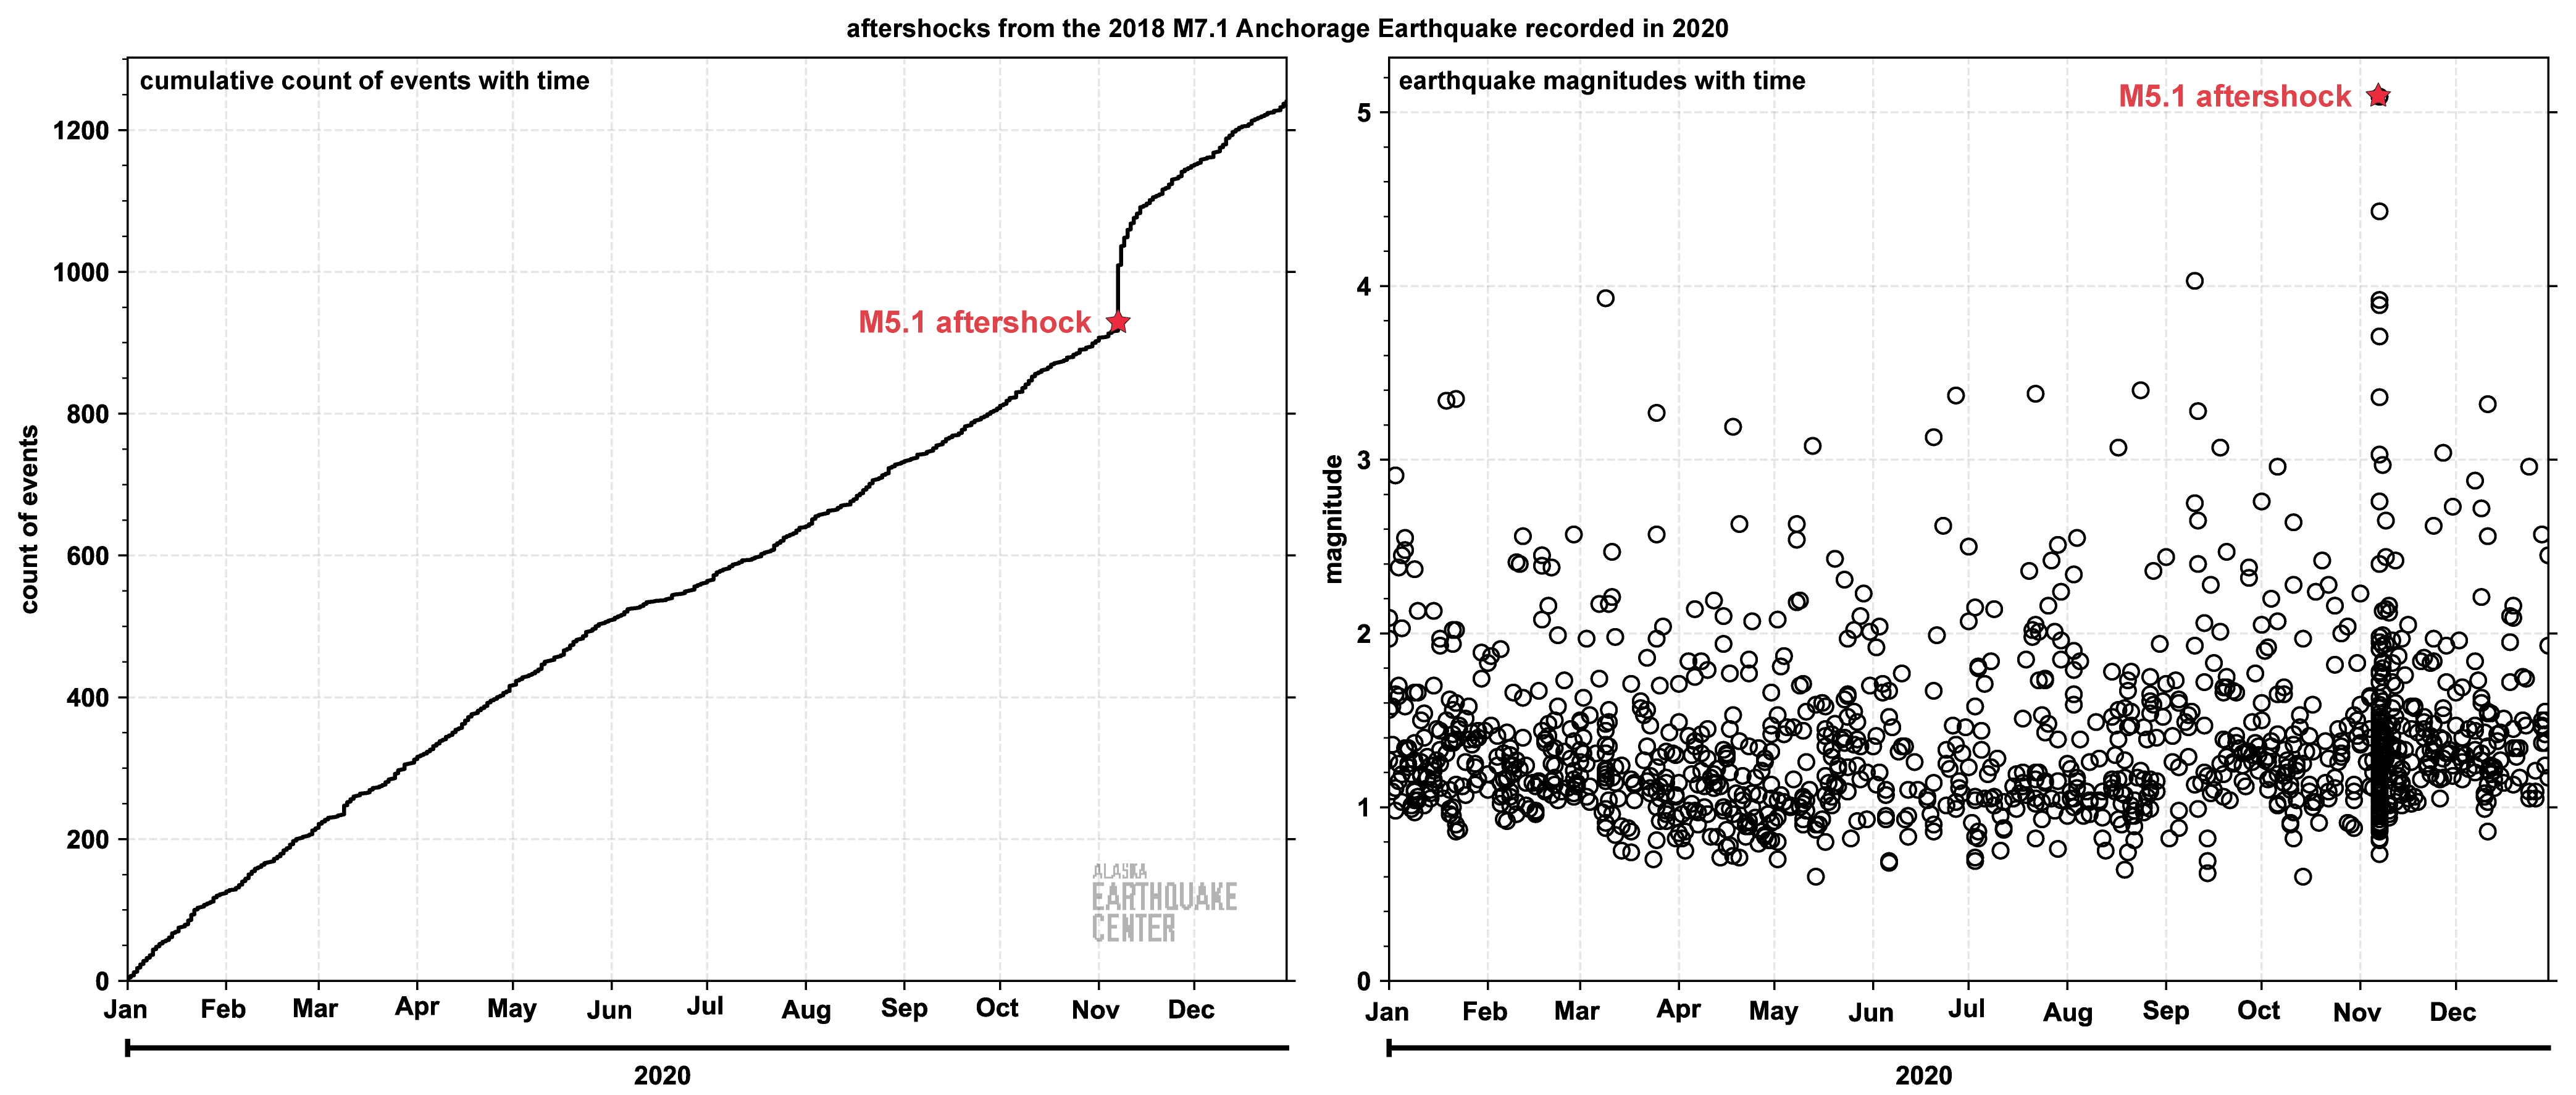 (L) The cumulative number of earthquakes in the 2018 M7.1 Anchorage Earthquake region in 2020. (R) The magnitudes of the each earthquake in the sequence plotted in time.